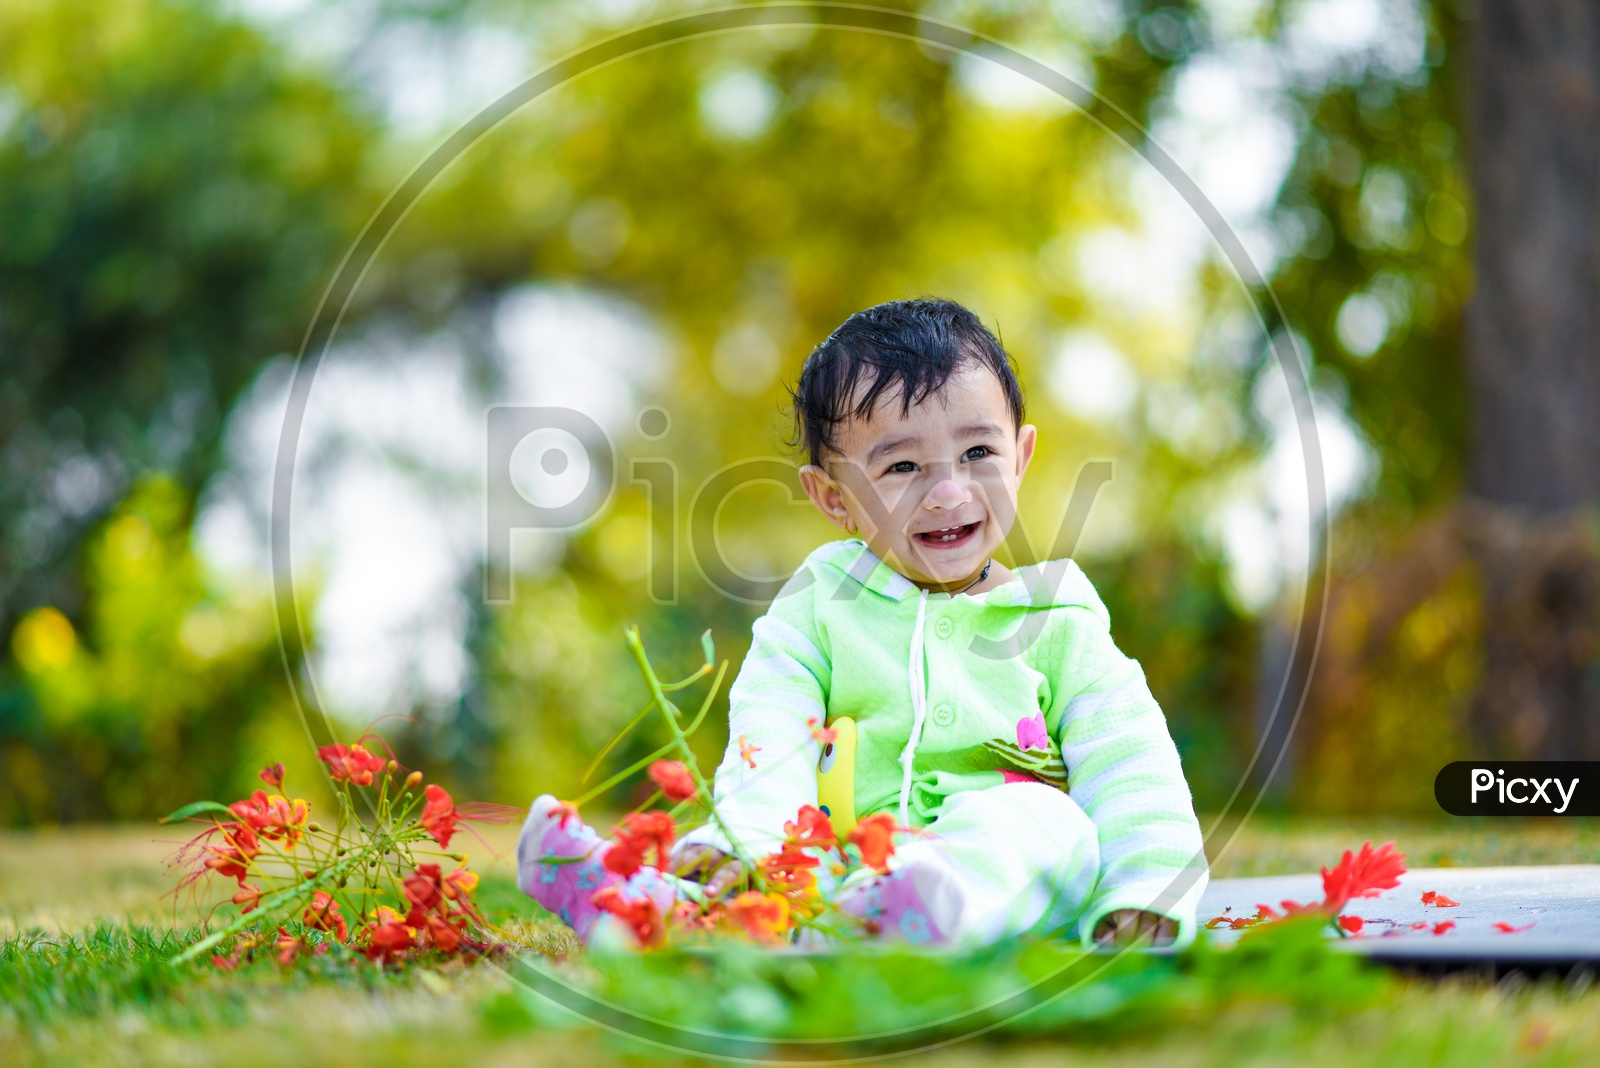 Indian Cute Baby Boy Closeup Shot with Smiling Face